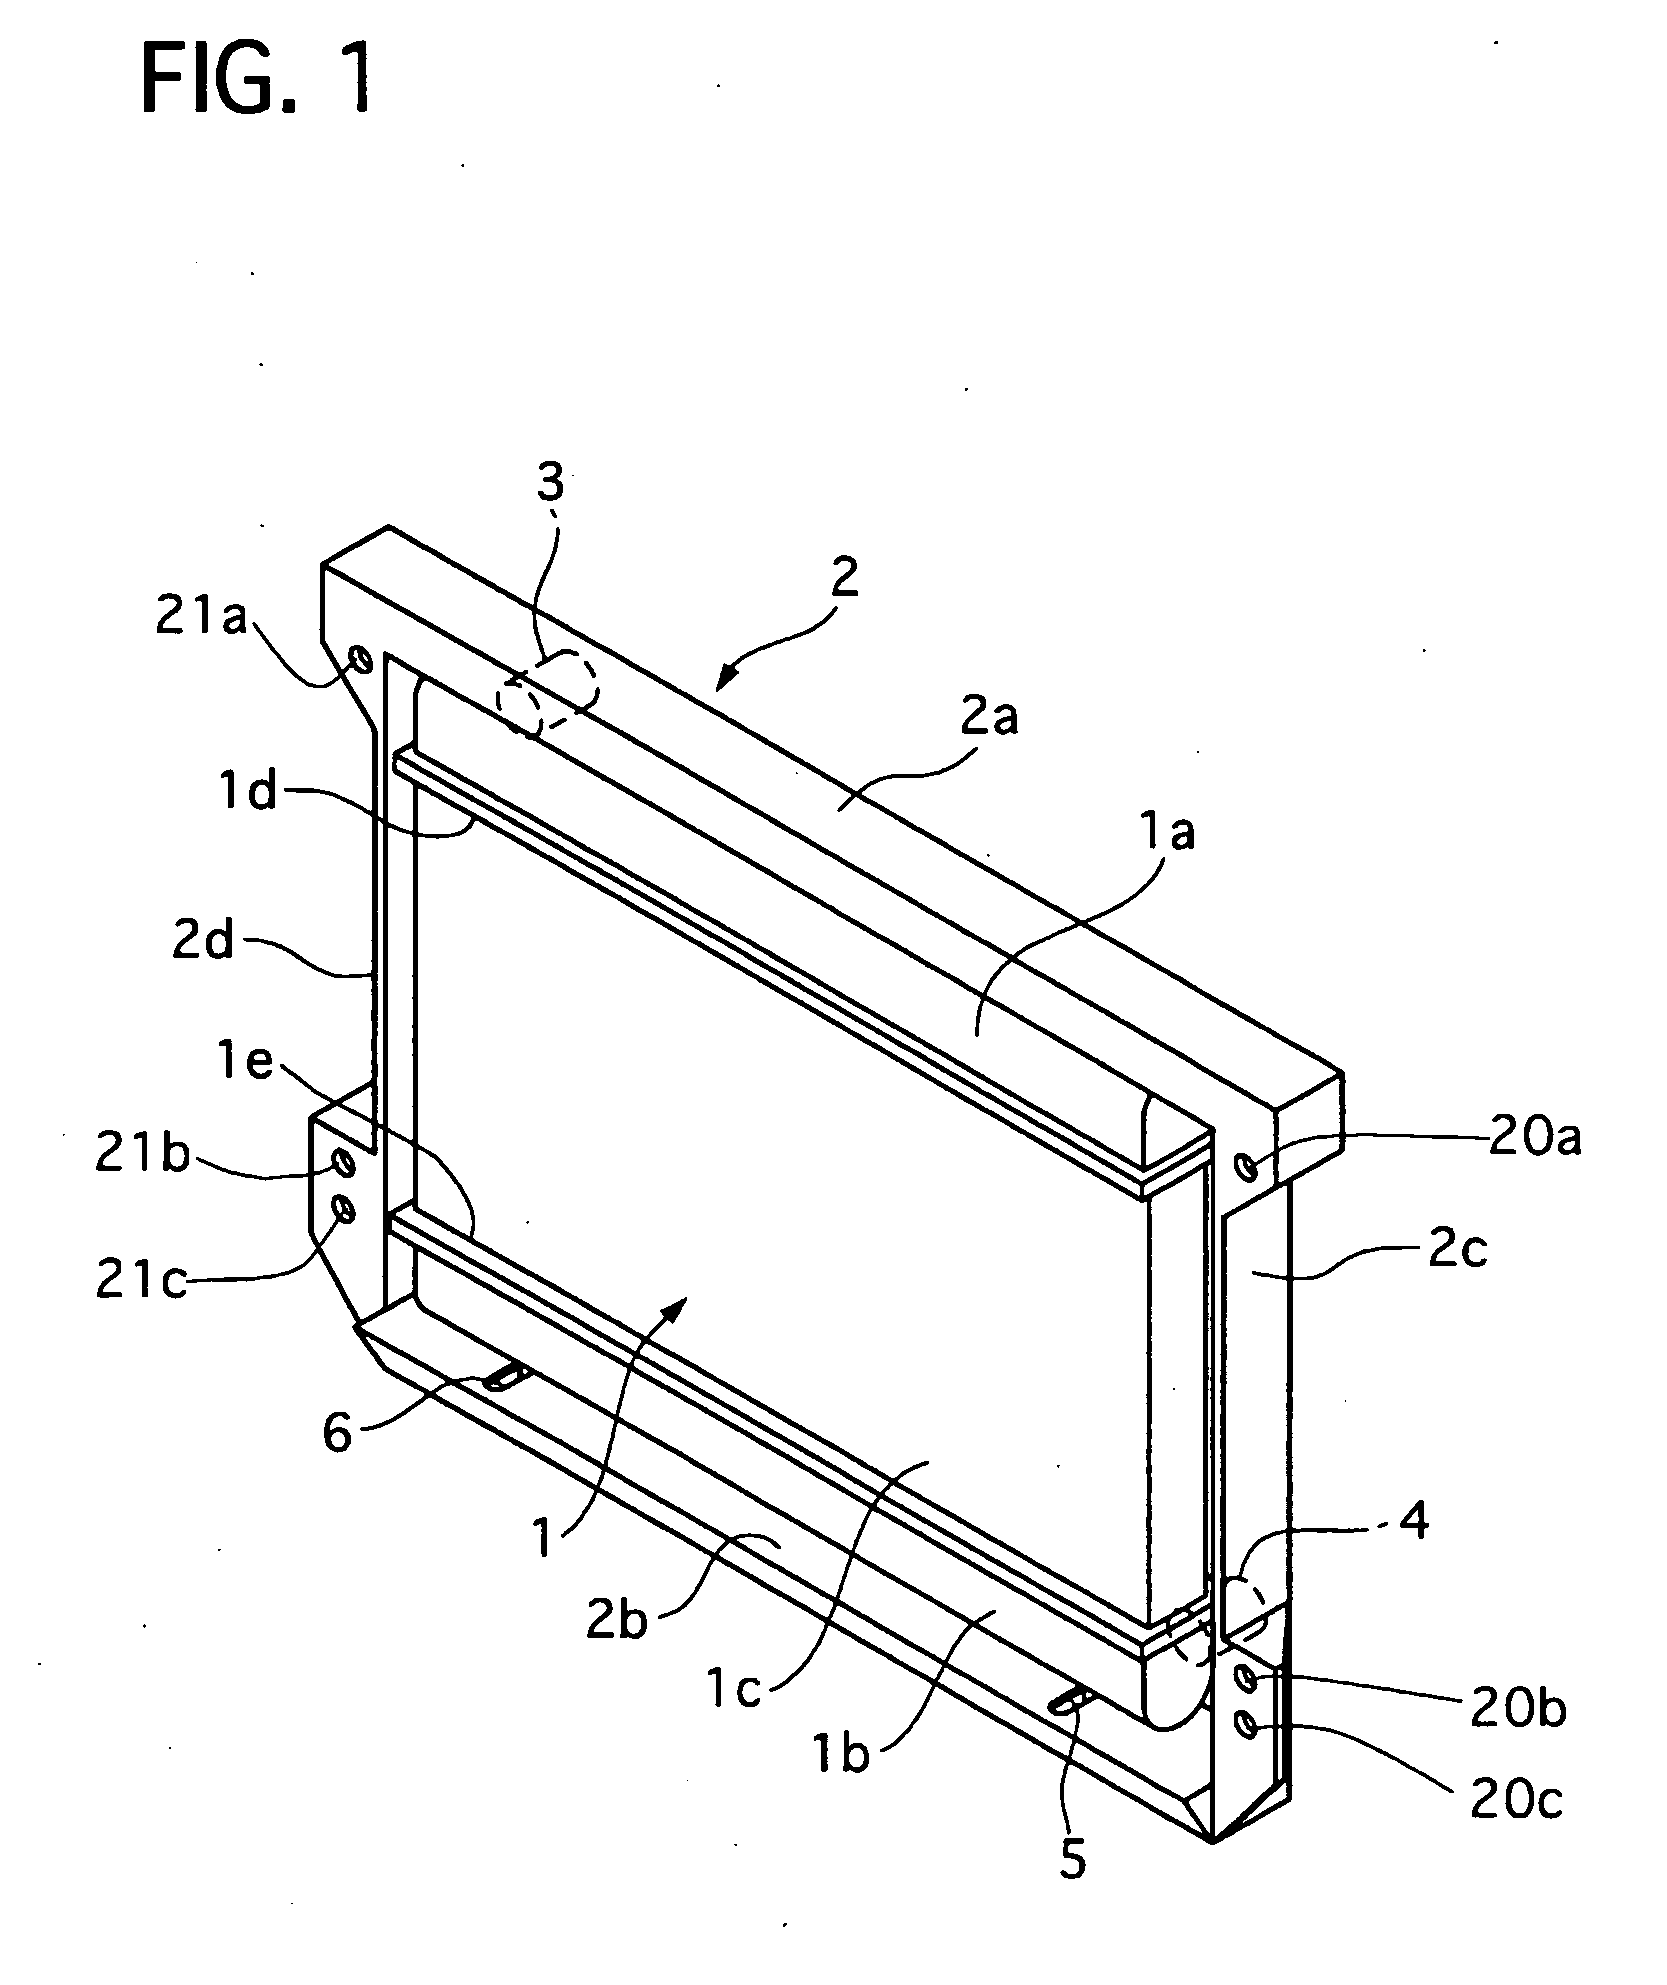 Radiator core support structure and its assembly method